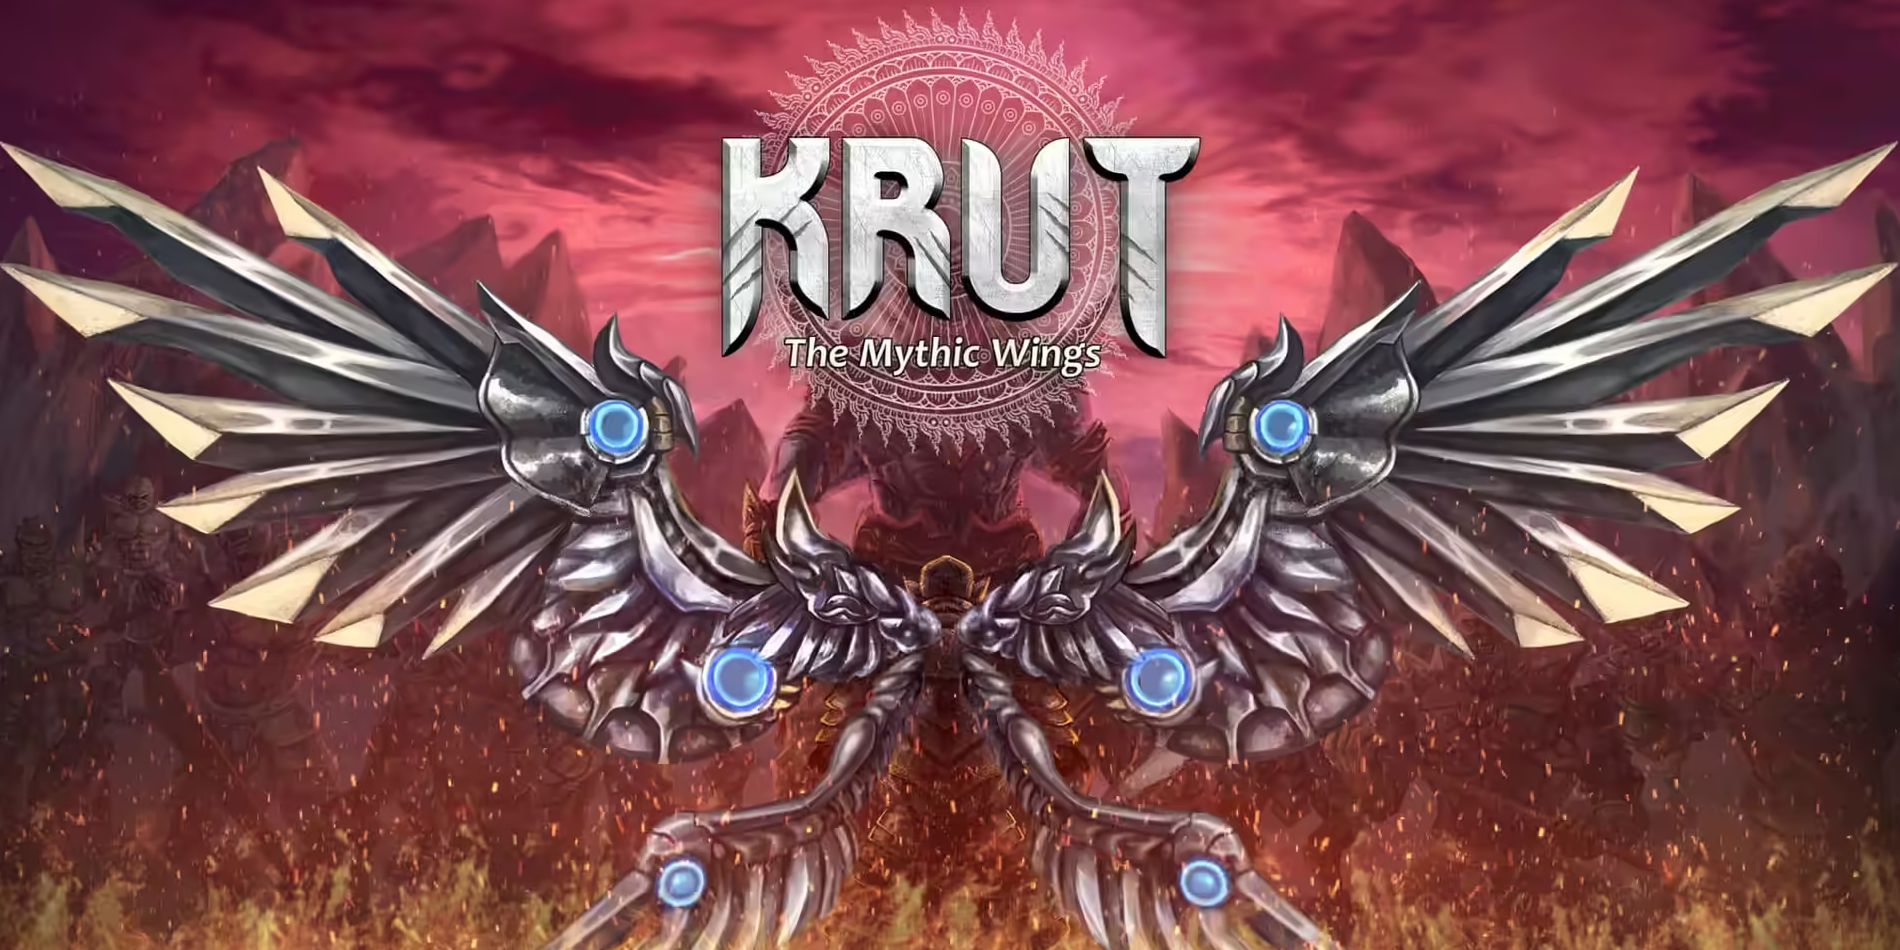 Krut: The Mythic Wings Review – Historia corta, combate predecible